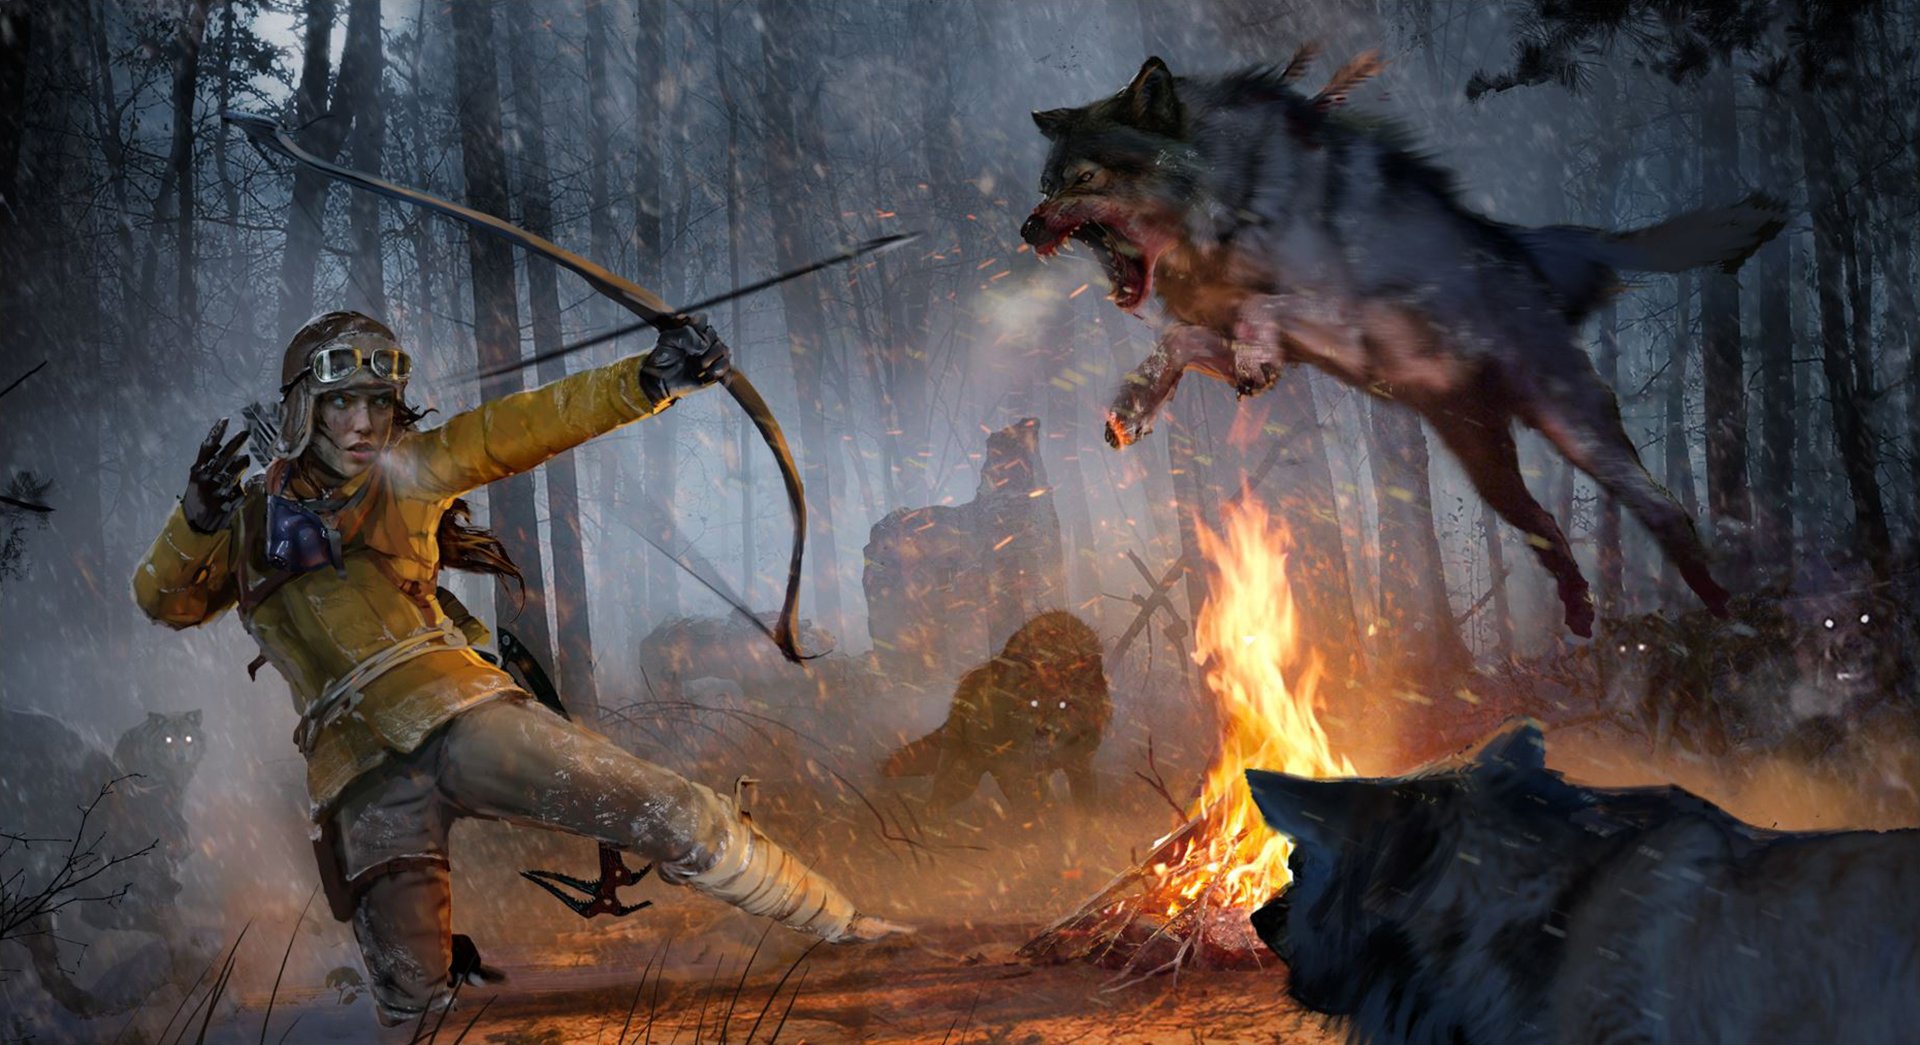 Rise of the Tomb Raider review – all action but too few risks